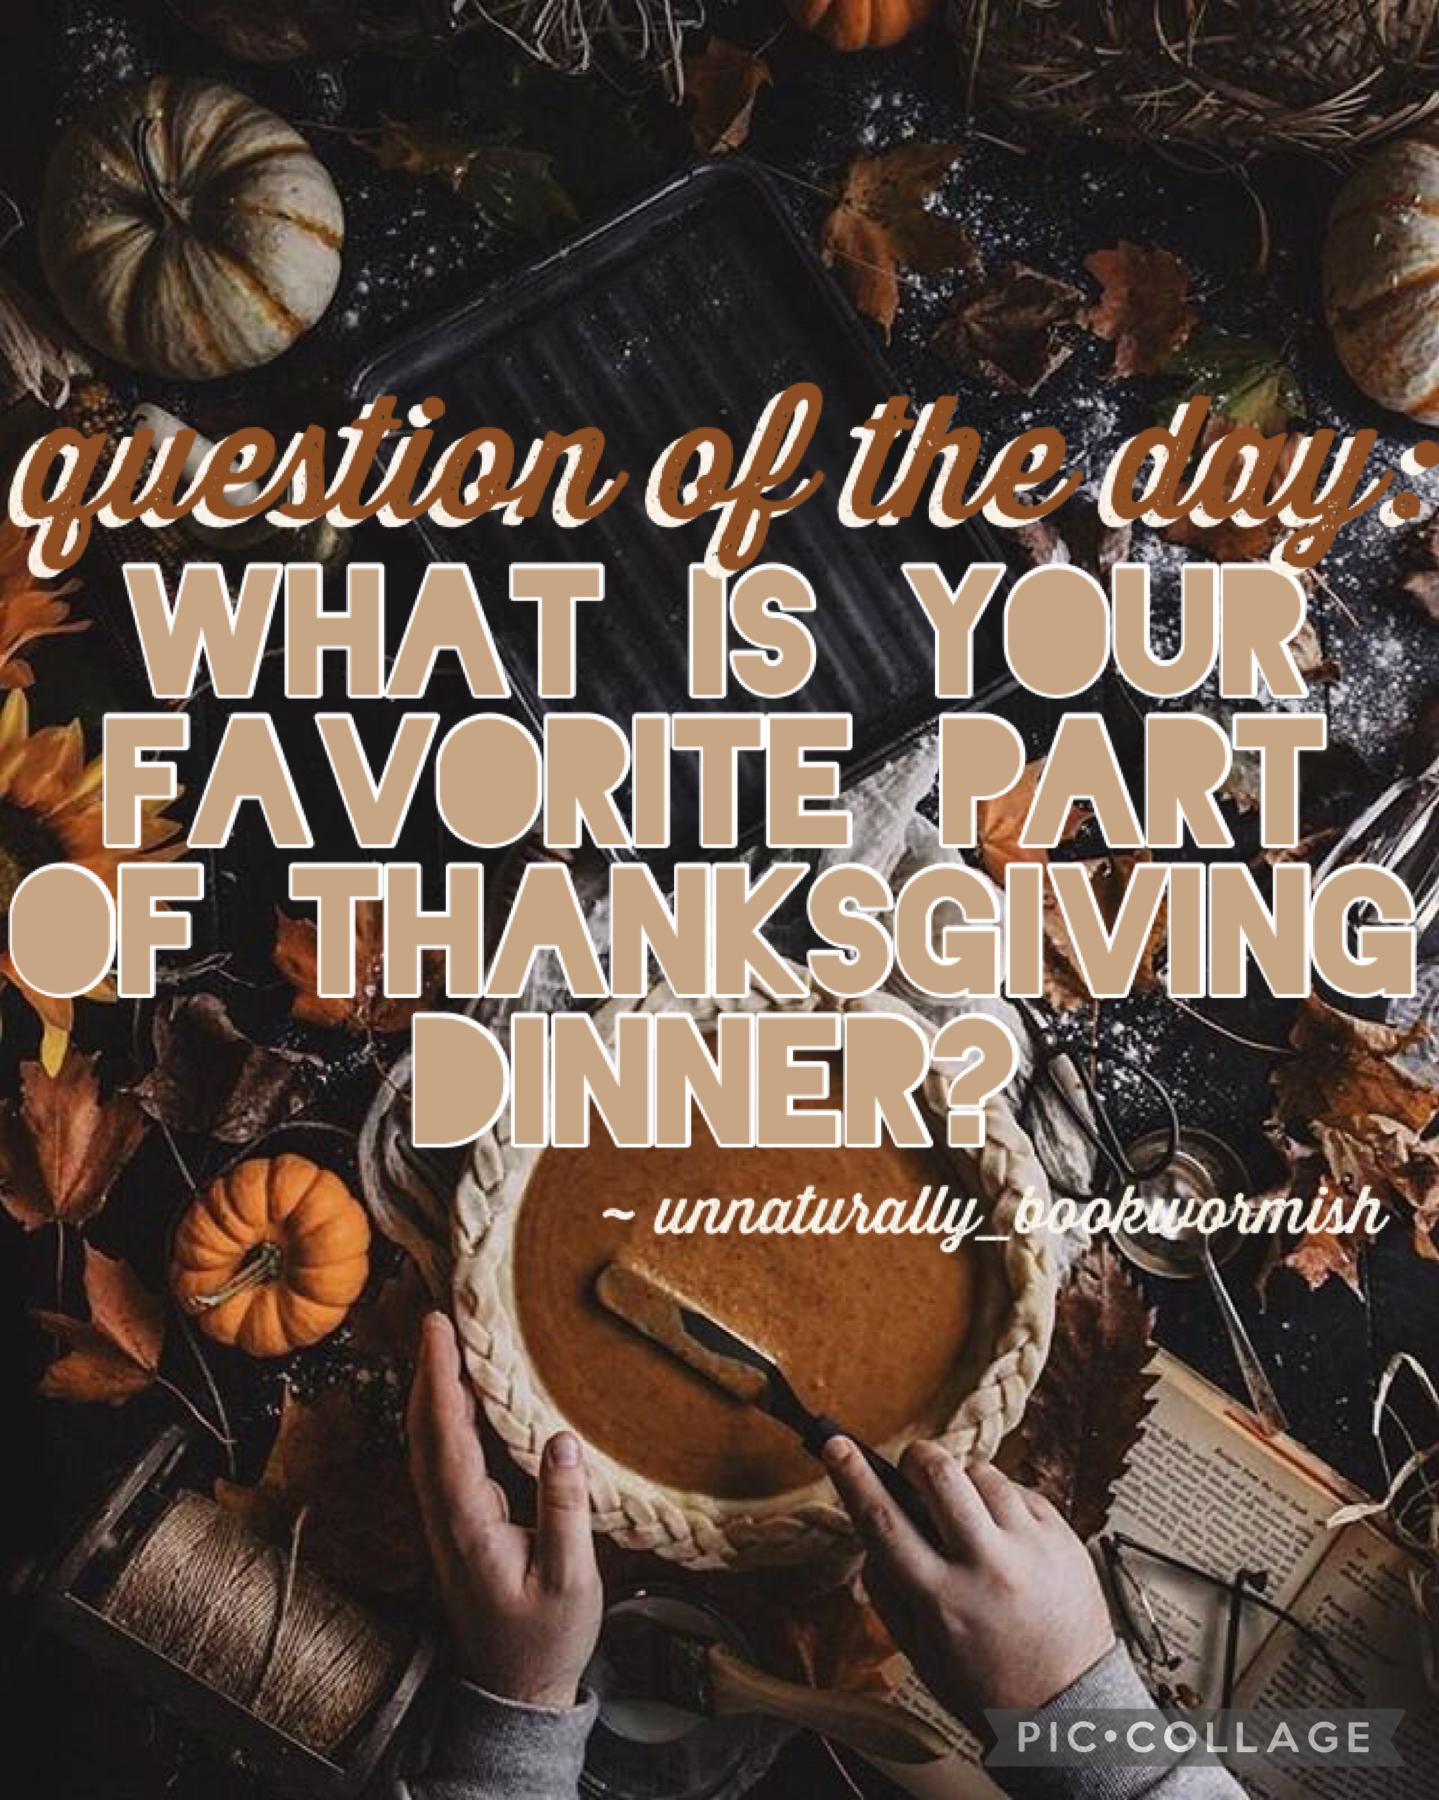 11-25-21 -tap-
Ok, I am seriously JUST NOW figuring out how to use the dropper to color my fonts like the background!! It’s so helpful...how come I never knew it existed?? 😂 anyways, happy thanksgiving! My answer of the day is cranberry sauce 😋